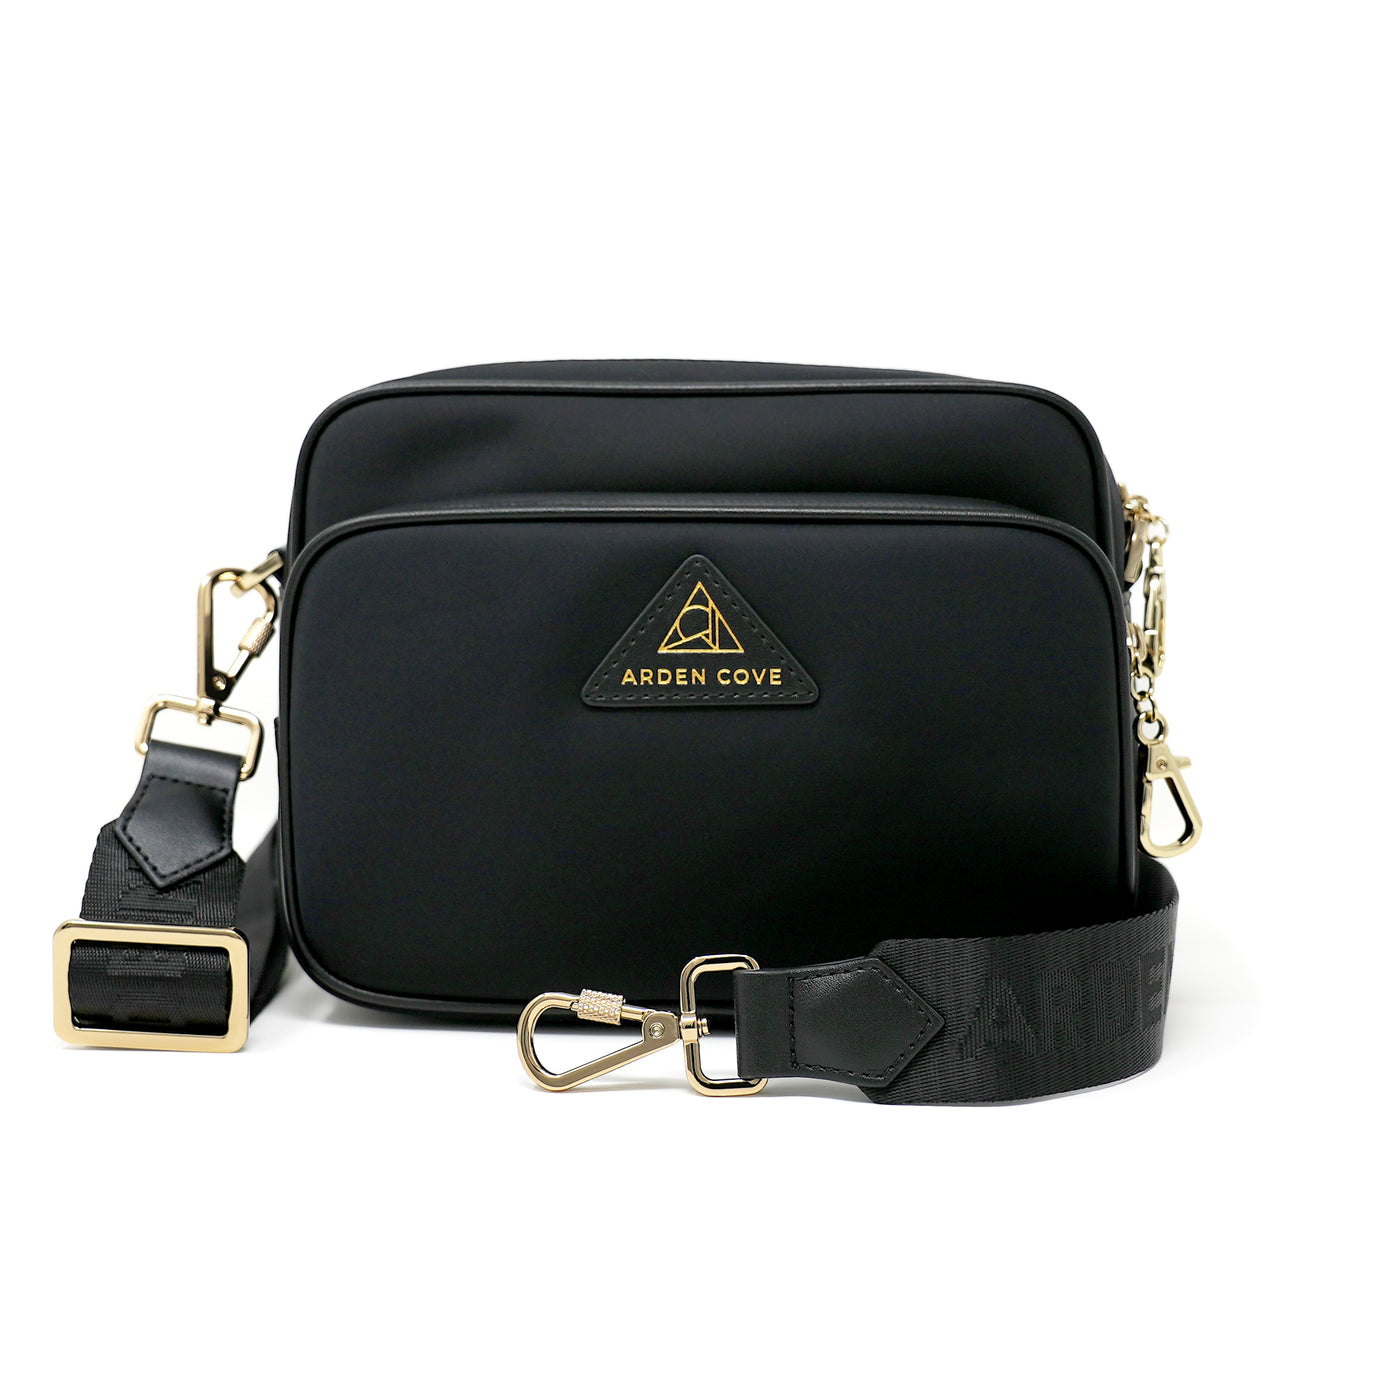 Anti-theft Water-resistant Travel Crossbody - Crissy Full Crossbody in Black Gold with nylon jacquard & locking clasps straps - front view - Arden Cove